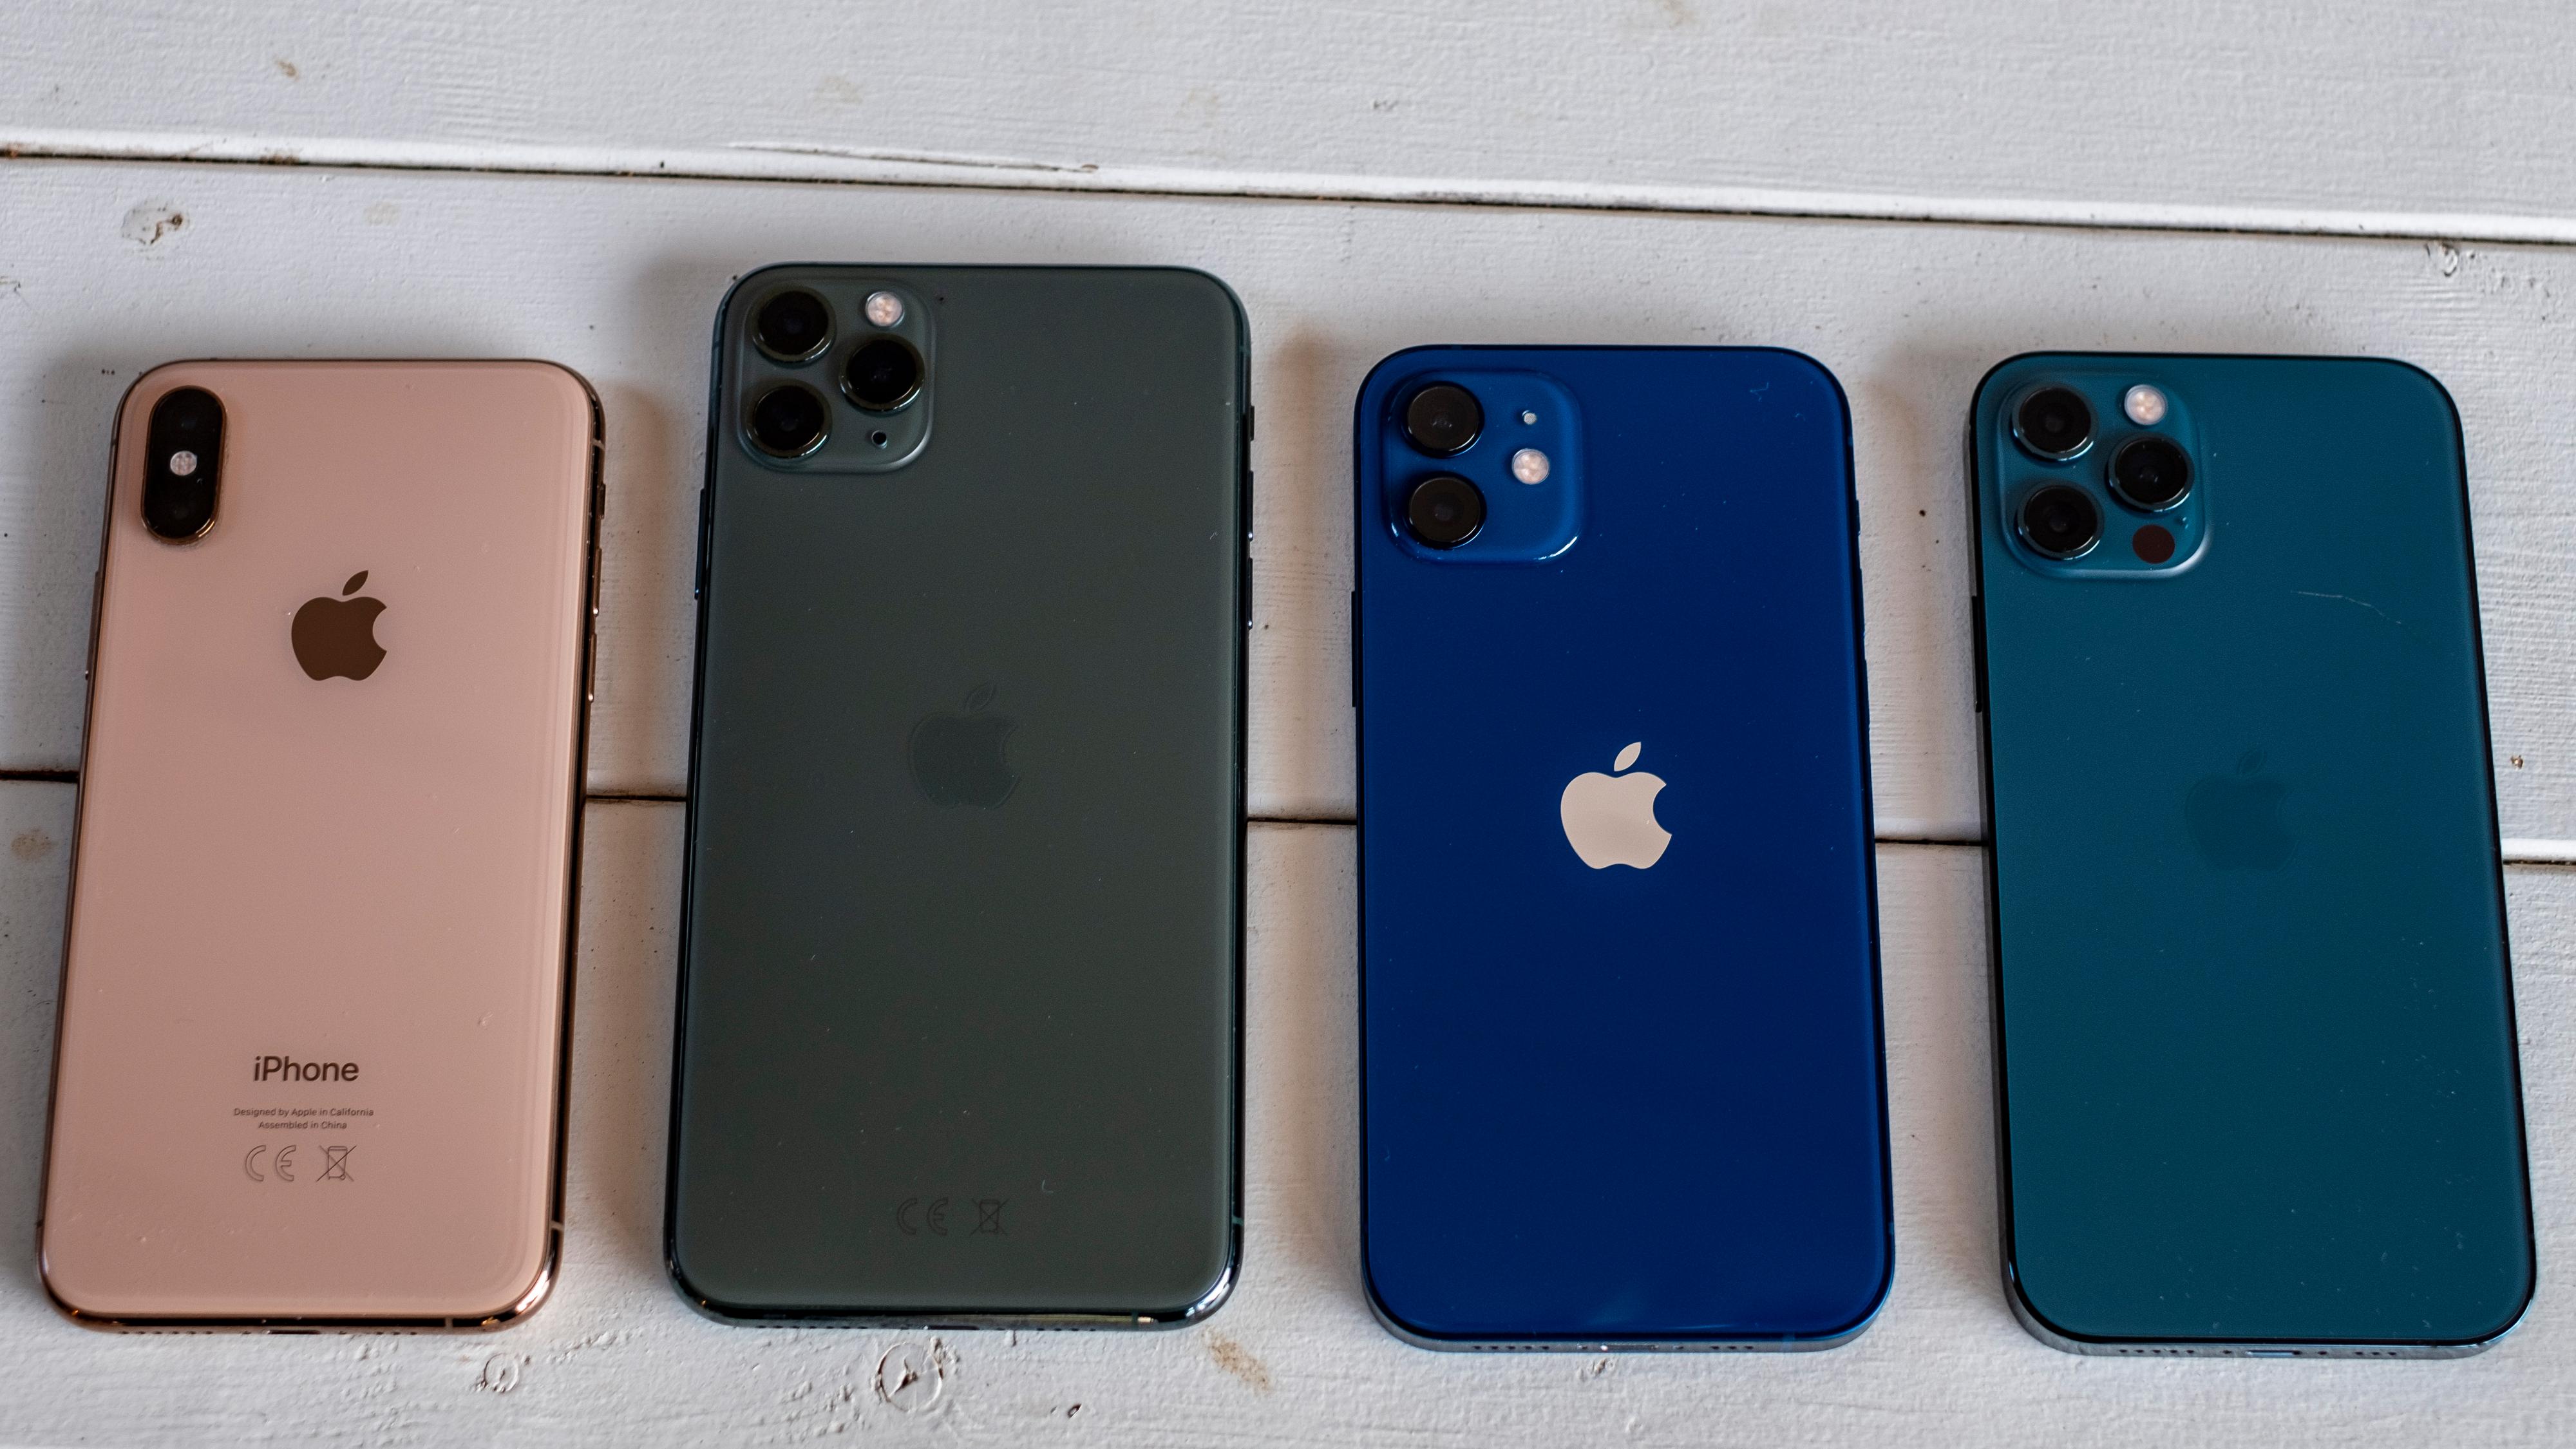 Fra venstre: iPhone Xs, iPhone 11 Pro, iPhone 12 og iPhone 12 Pro.